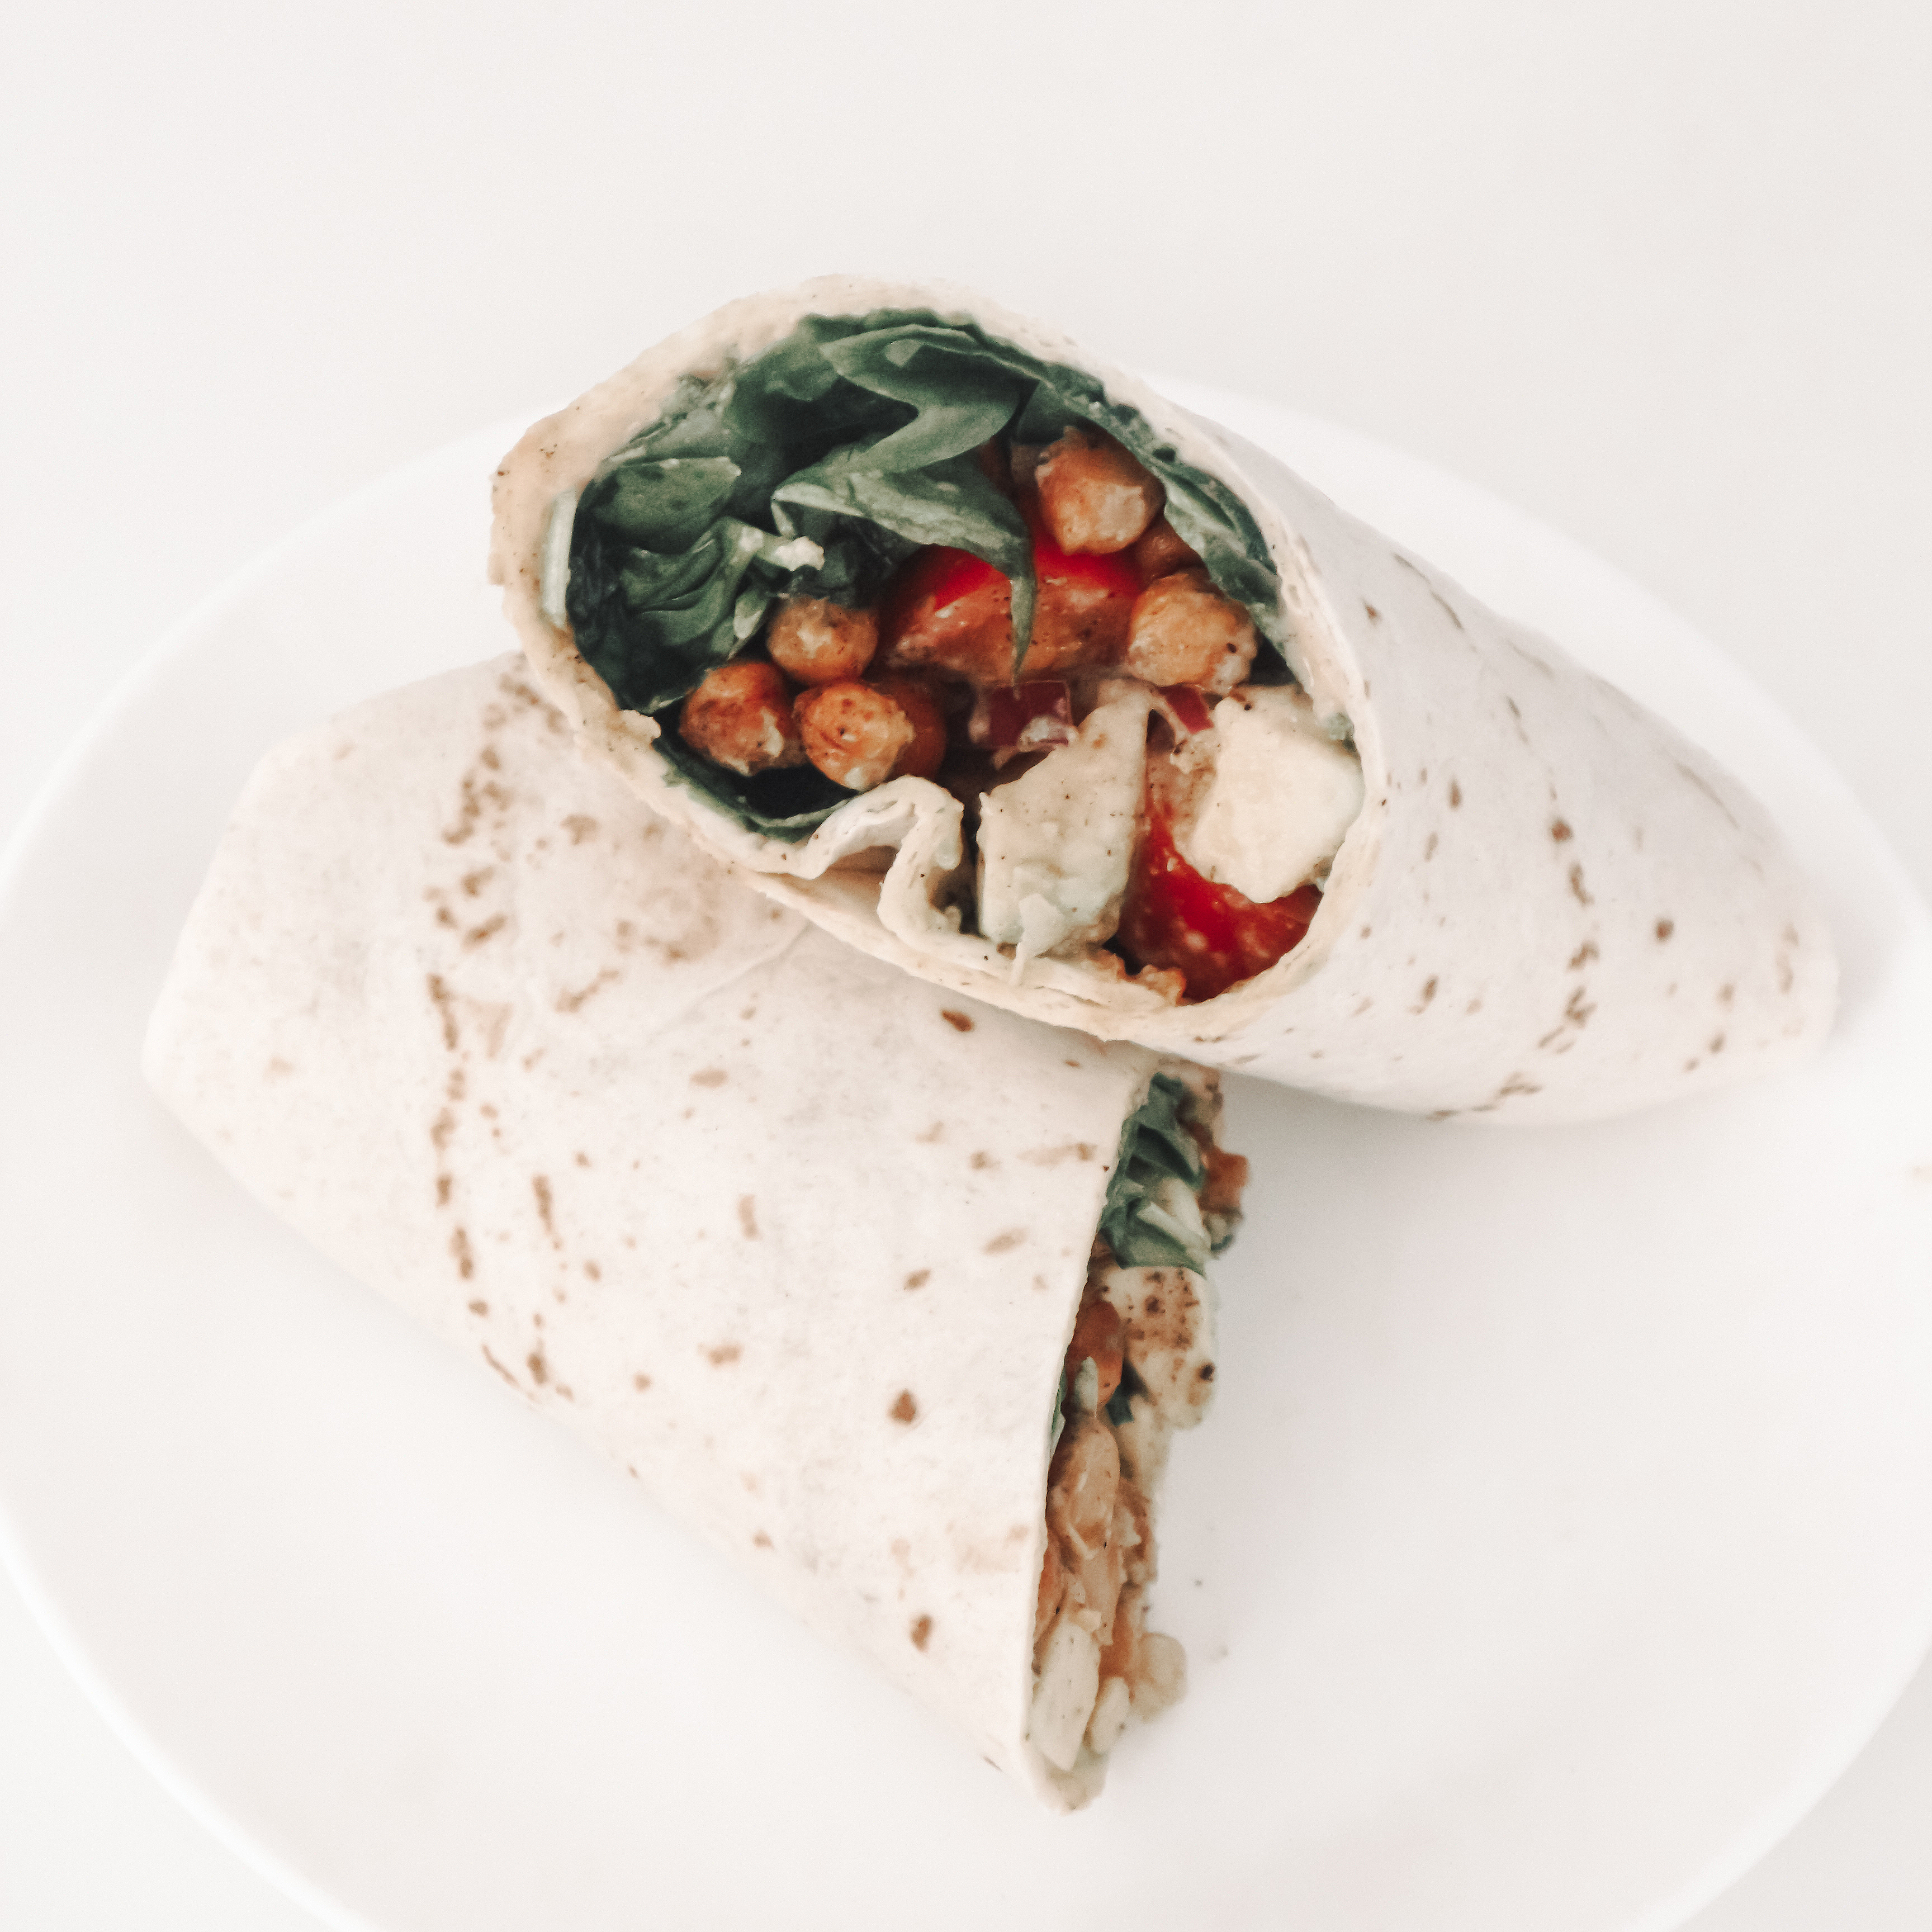 Vegan wrap with spinach, chickpeas and avocado.